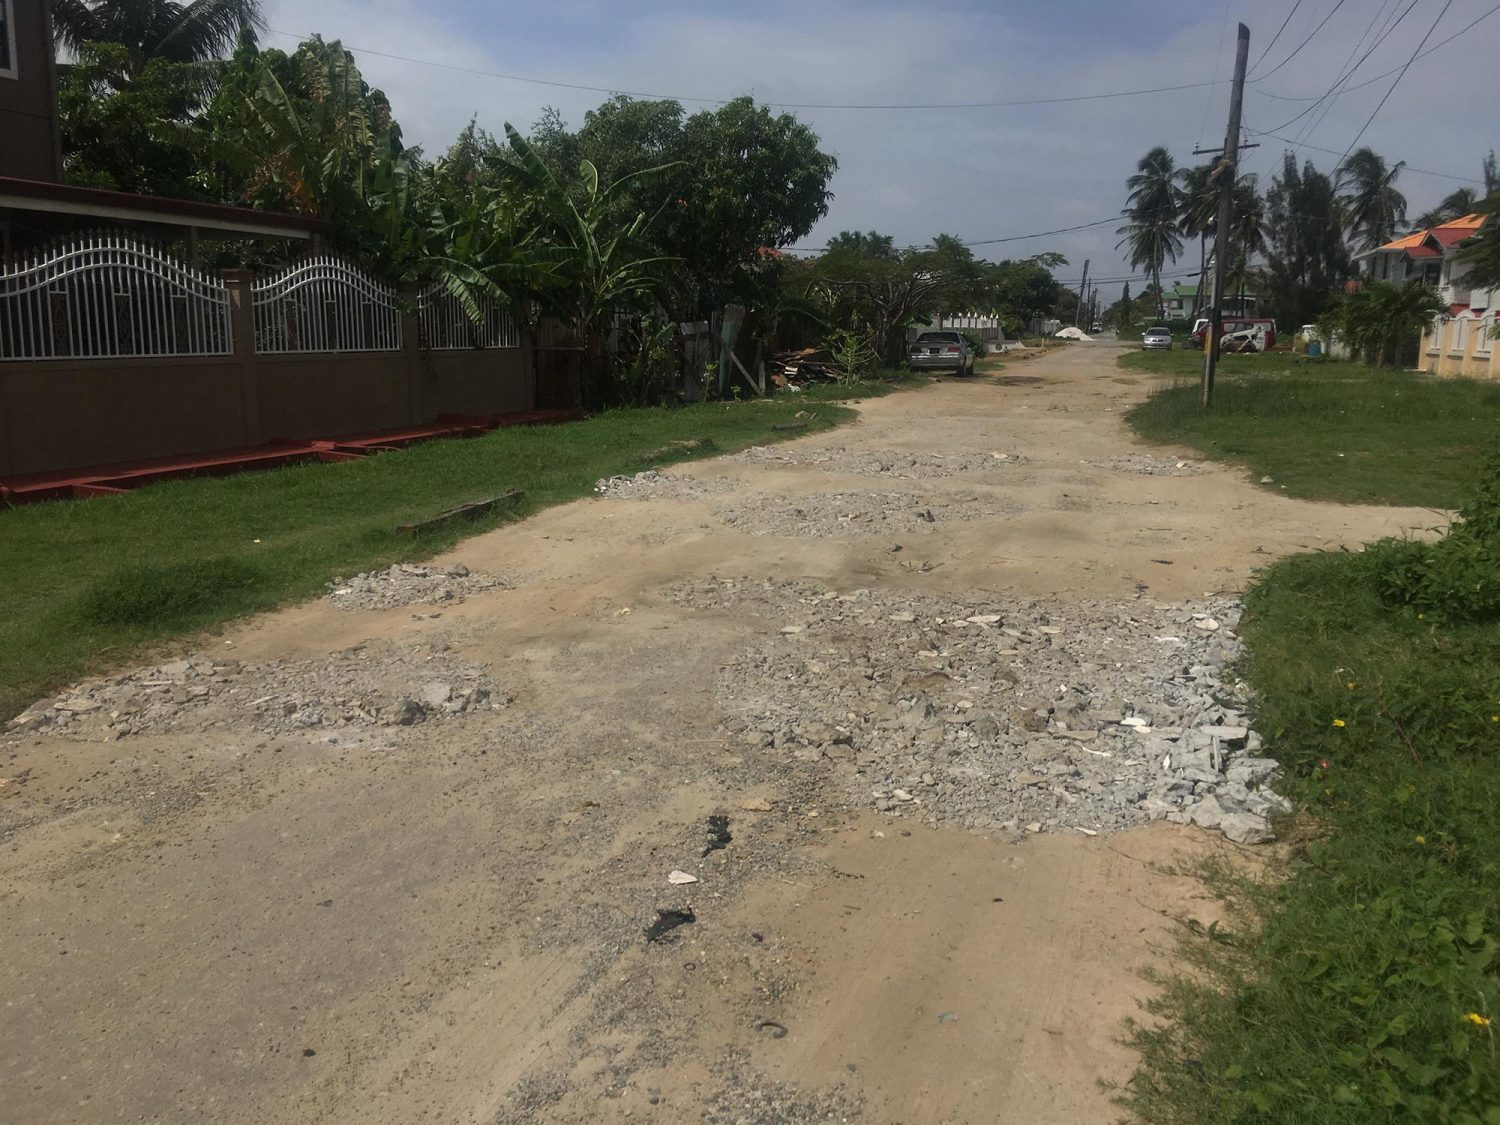 A section of the road in Hugh Ghanie Park in Cummings Lodge, which is riddled with potholes. As a temporary fix, residents filled the holes with construction material. 